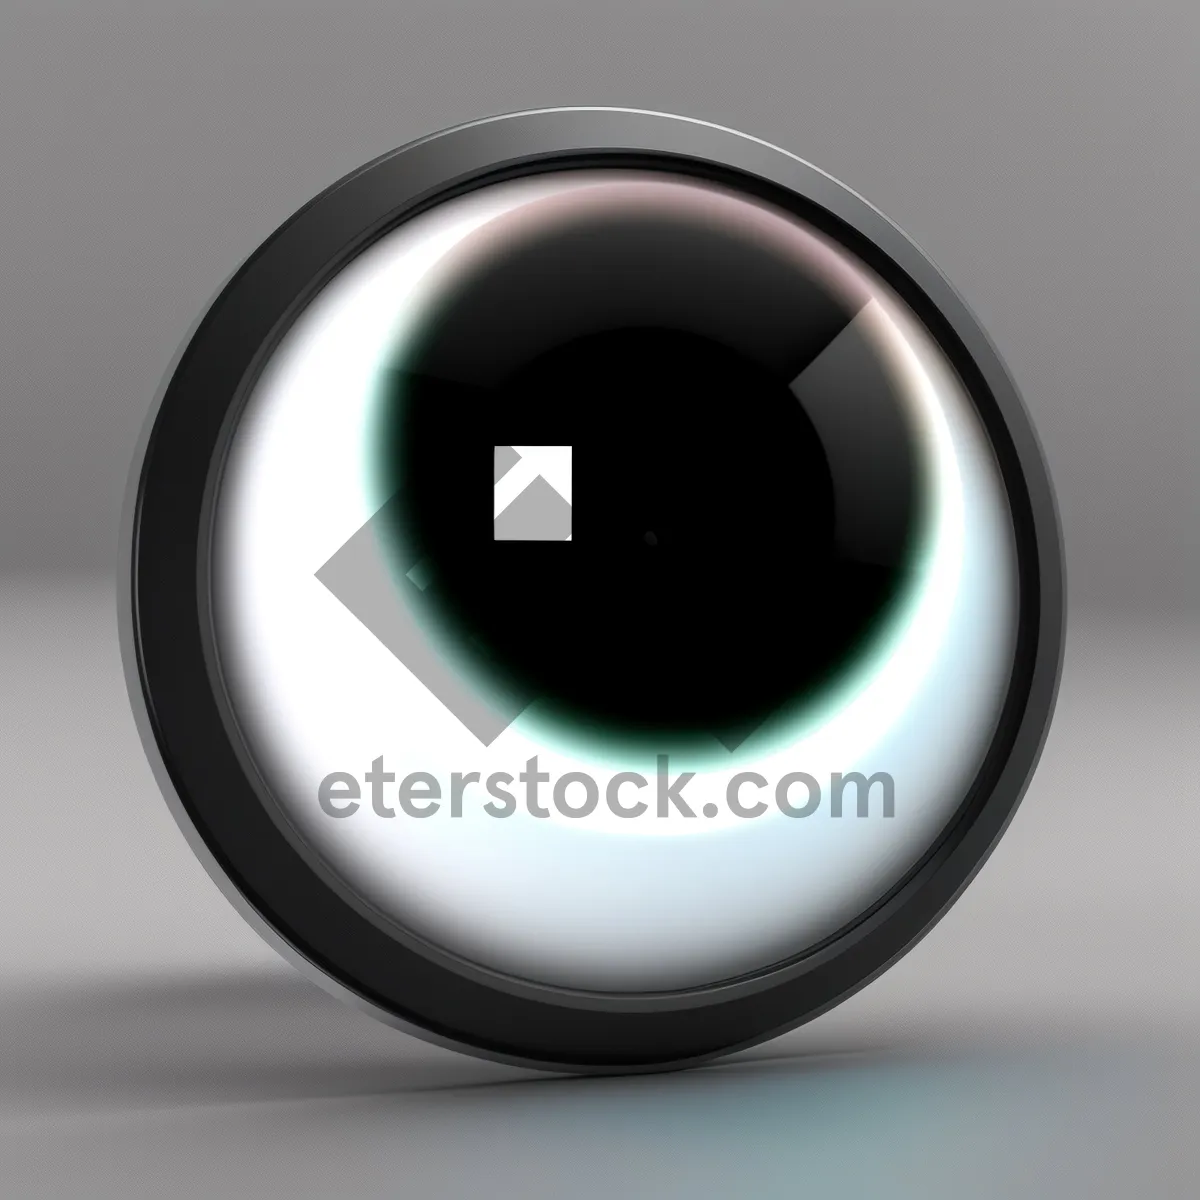 Picture of Shiny Black Circle Button Design with Metallic Reflection